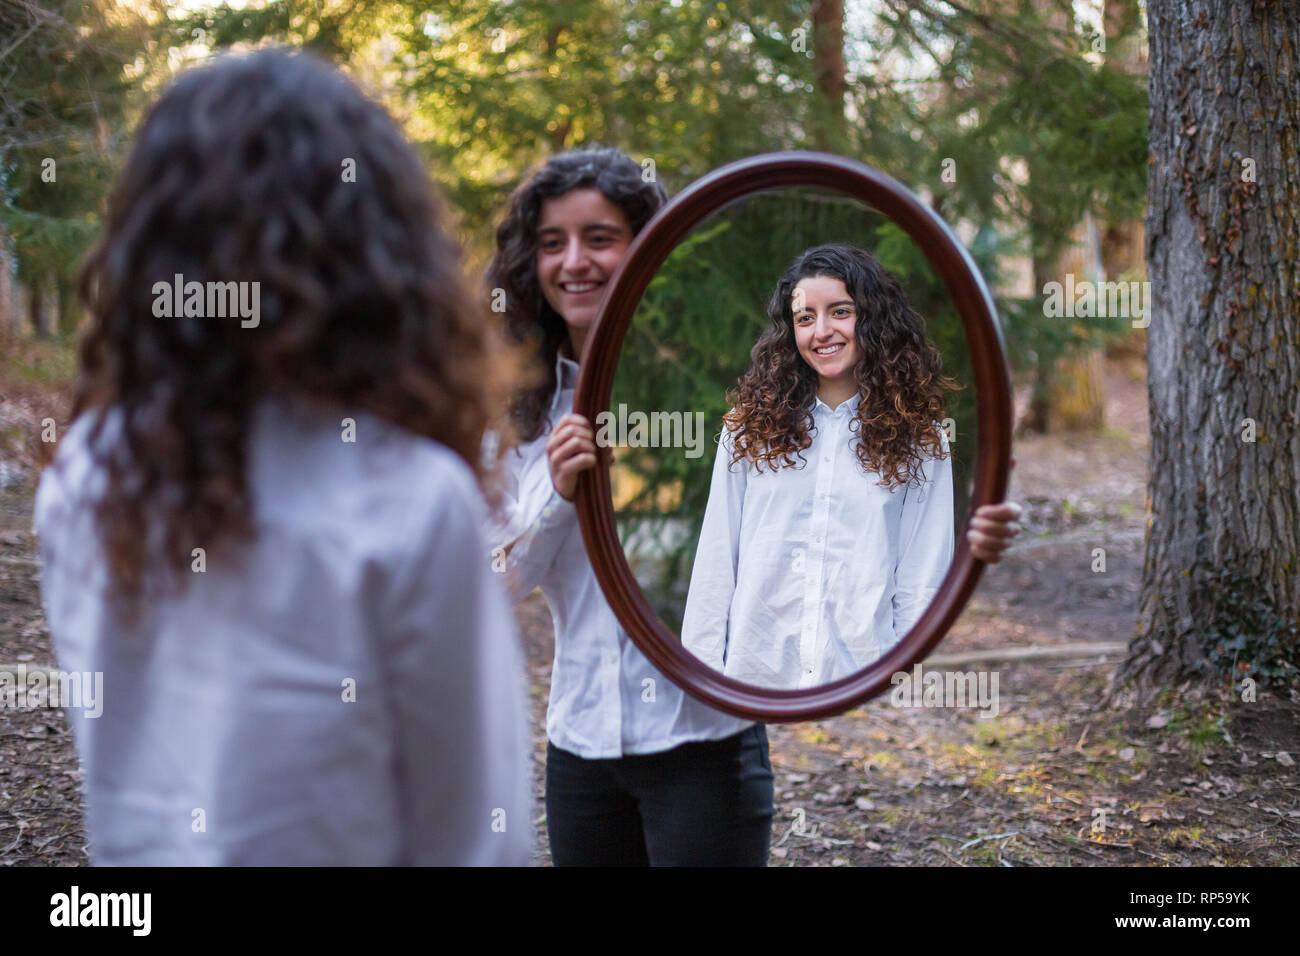 Cheerful young woman showing reflection of twin sister in autumn day in the forest Stock Photo